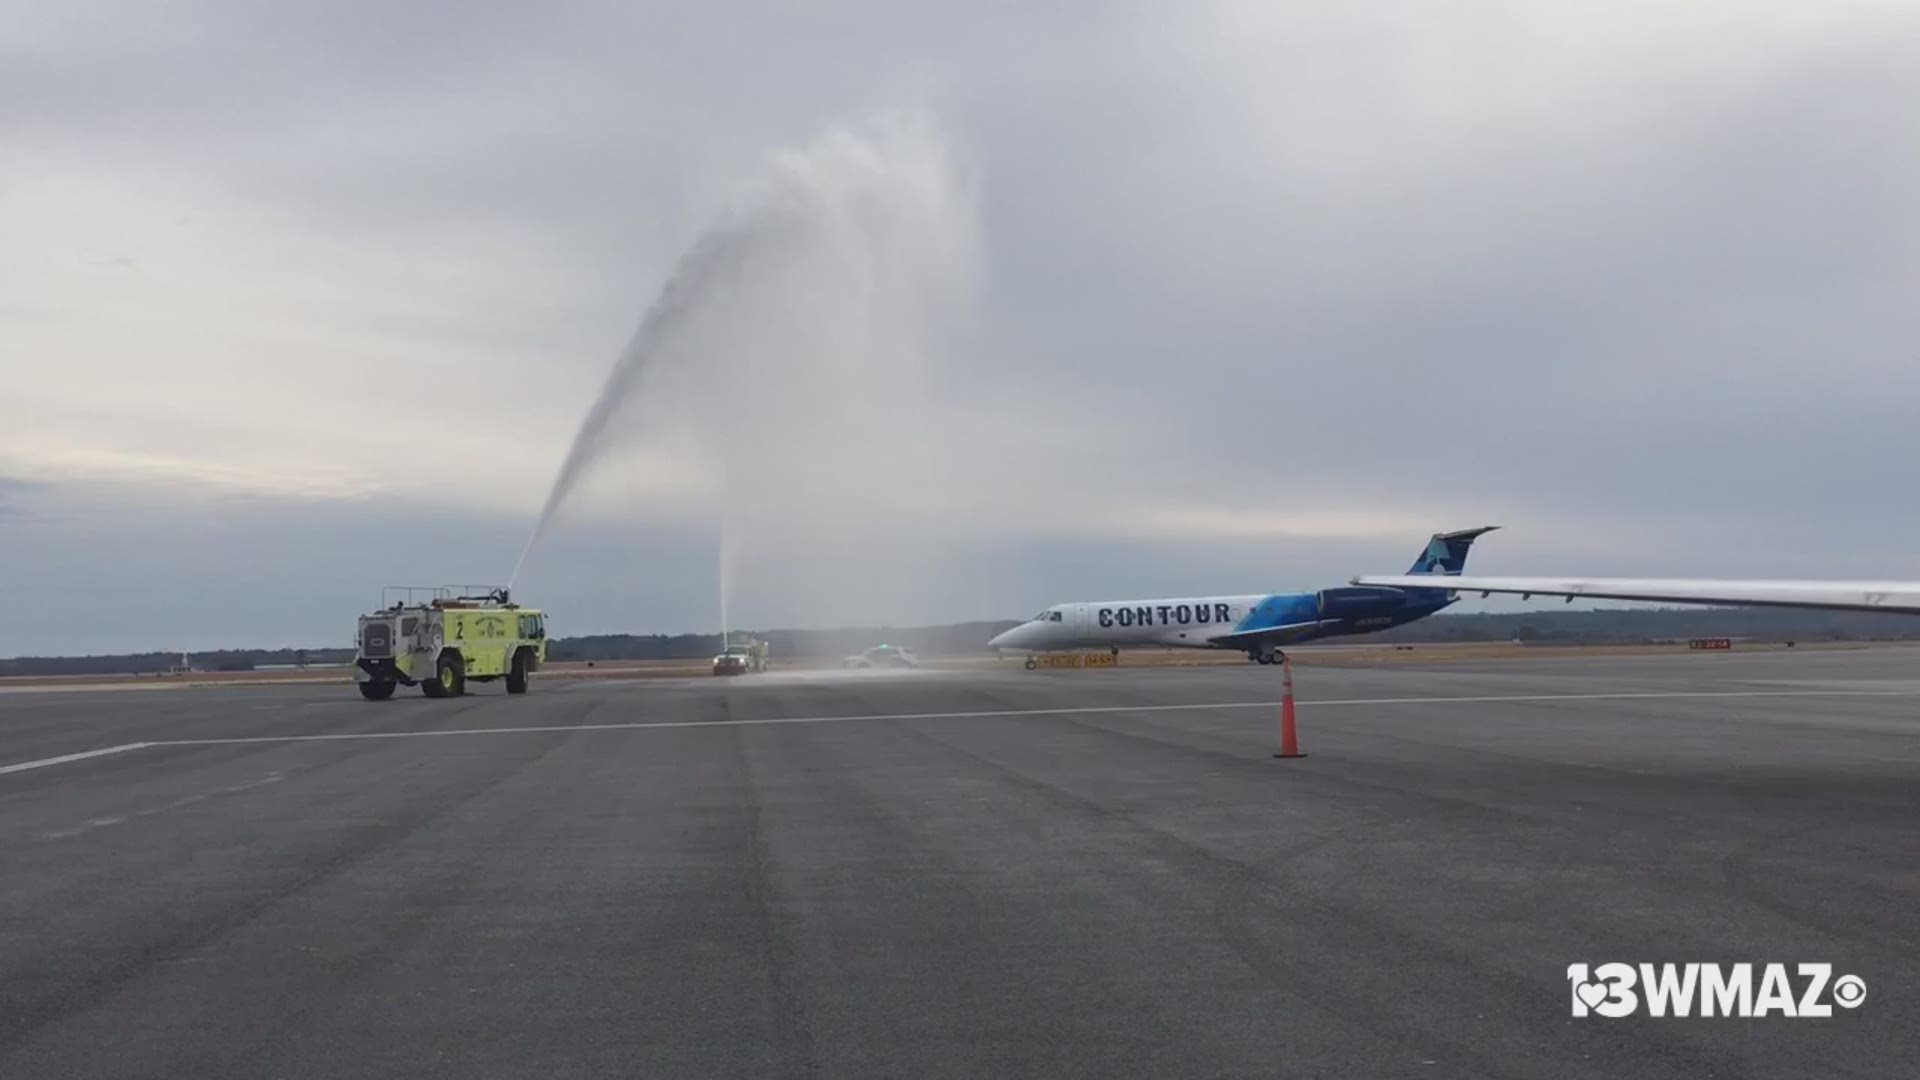 Contour Airlines' newest round-trip service from Macon to Tampa started Wednesday